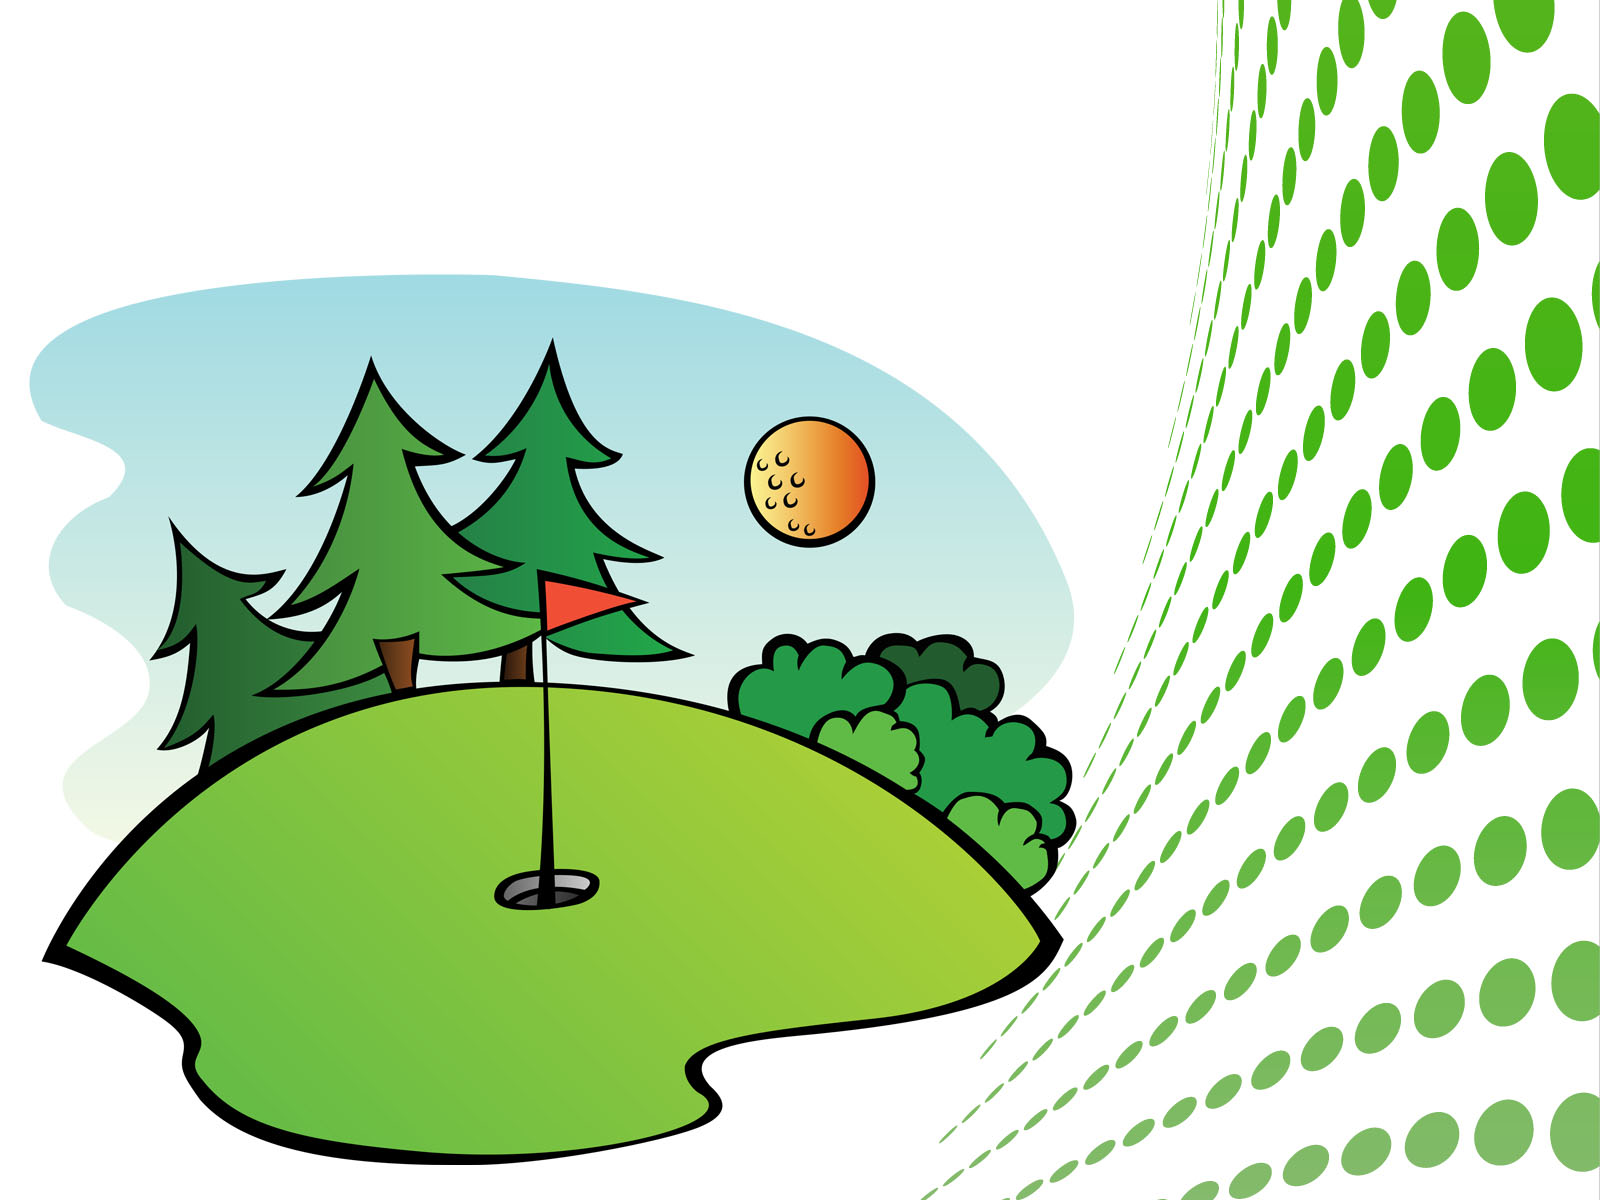 Golf course clip art free vector in open office drawing svg clip